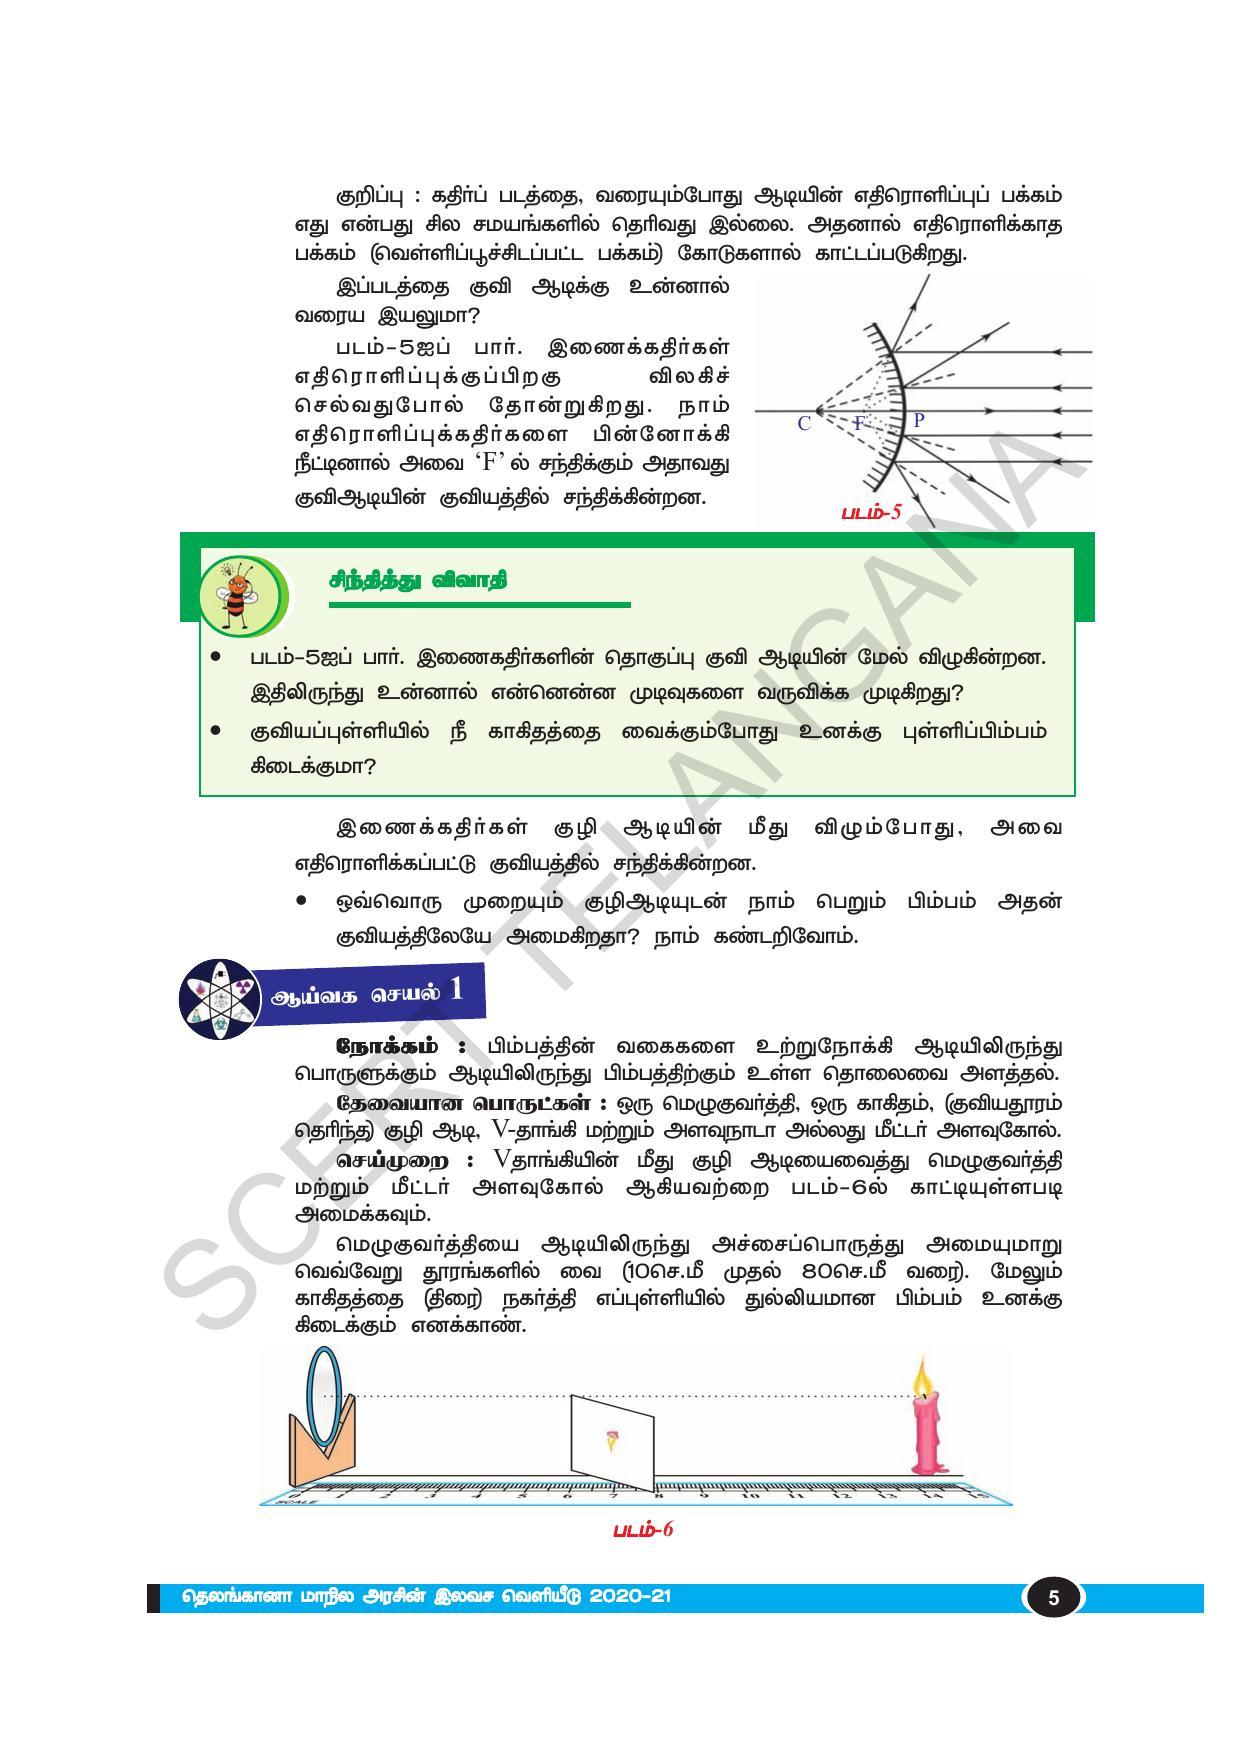 TS SCERT Class 10 Physical Science(Tamil Medium) Text Book - Page 17